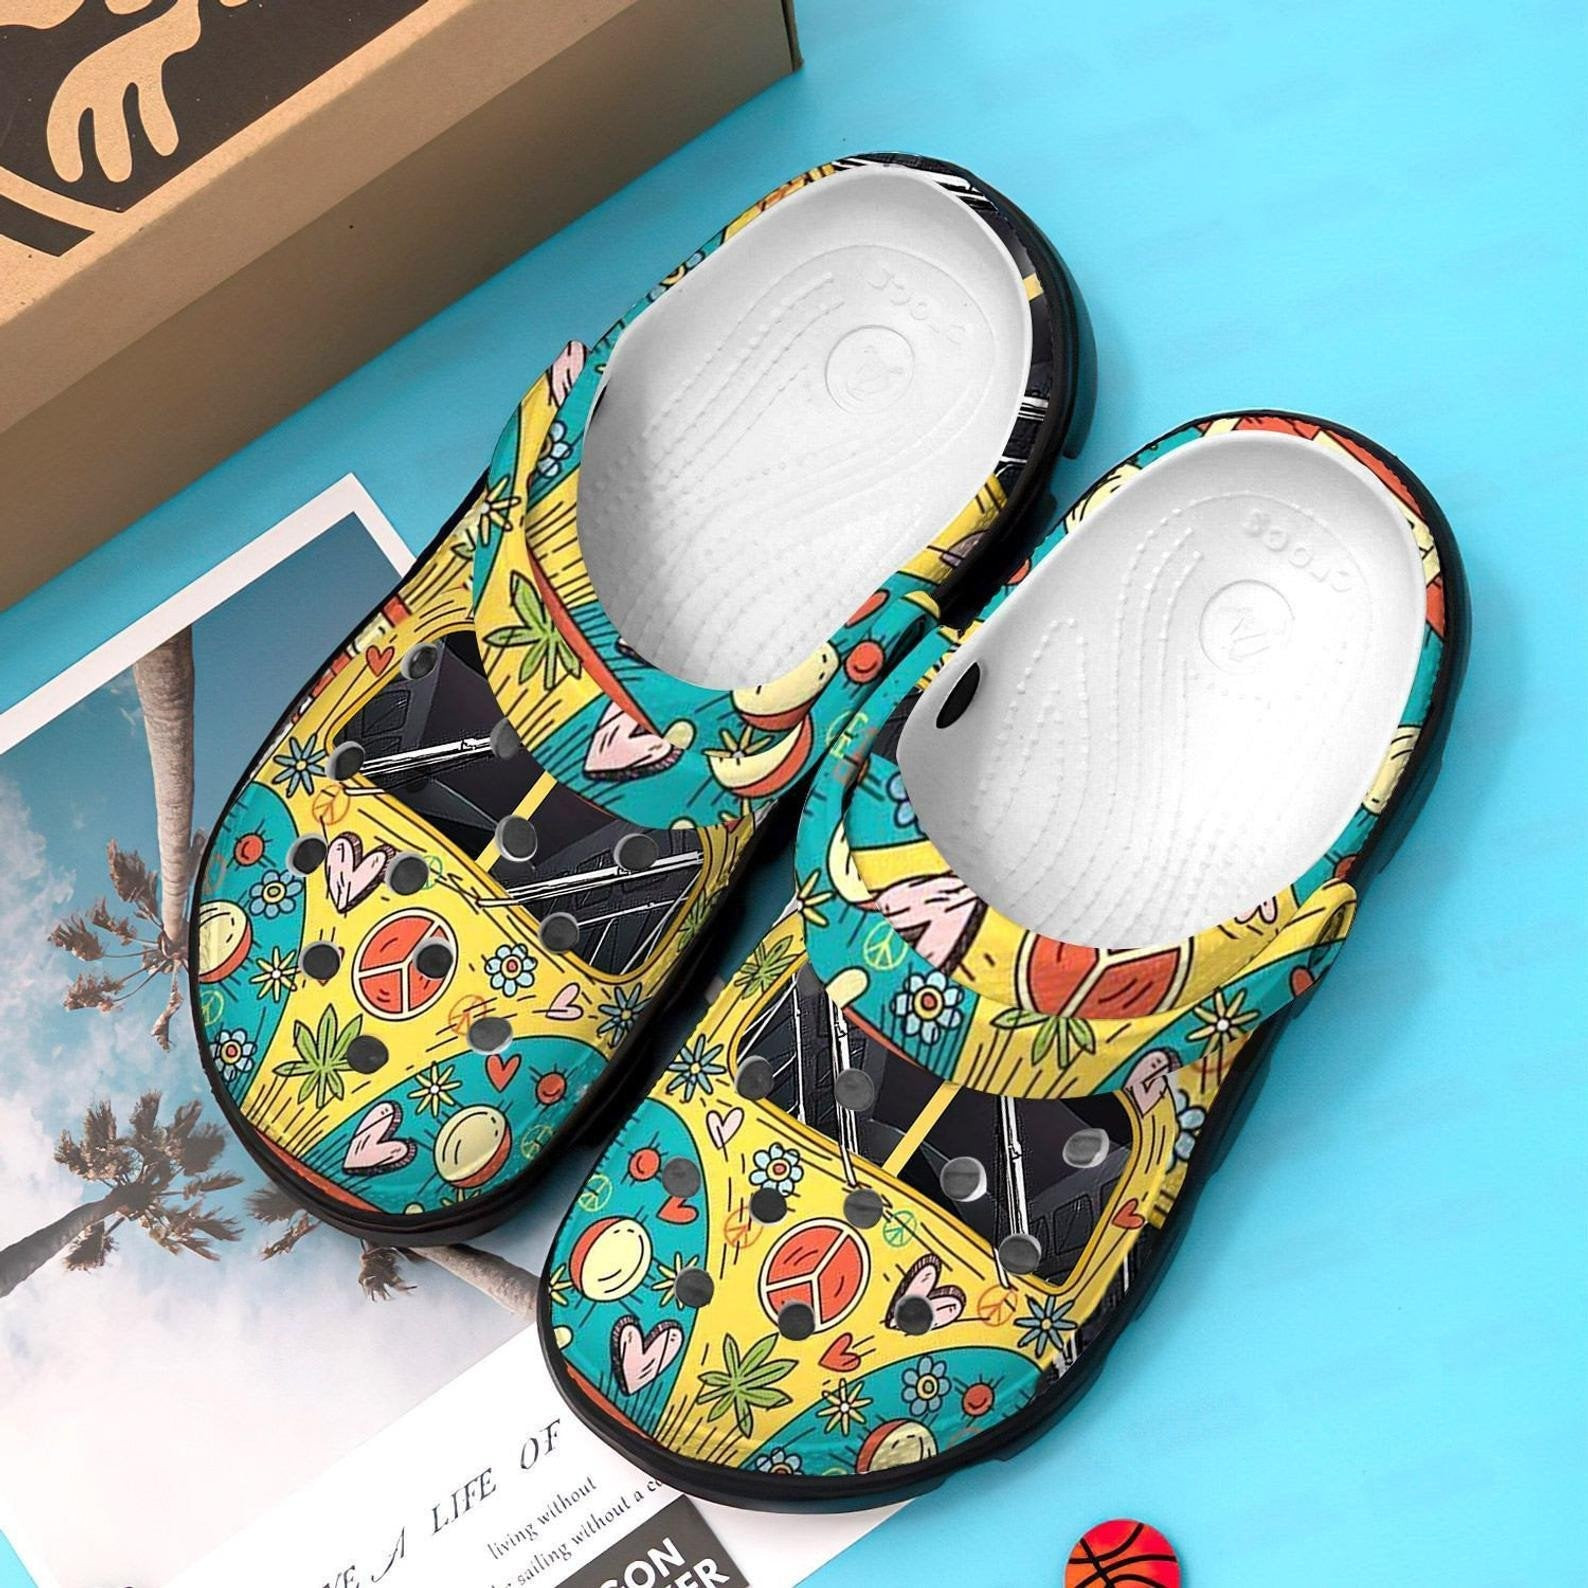 Yellow Hippie Car Crocs Shoes Crocbland Clogs Gifts For Kids Children